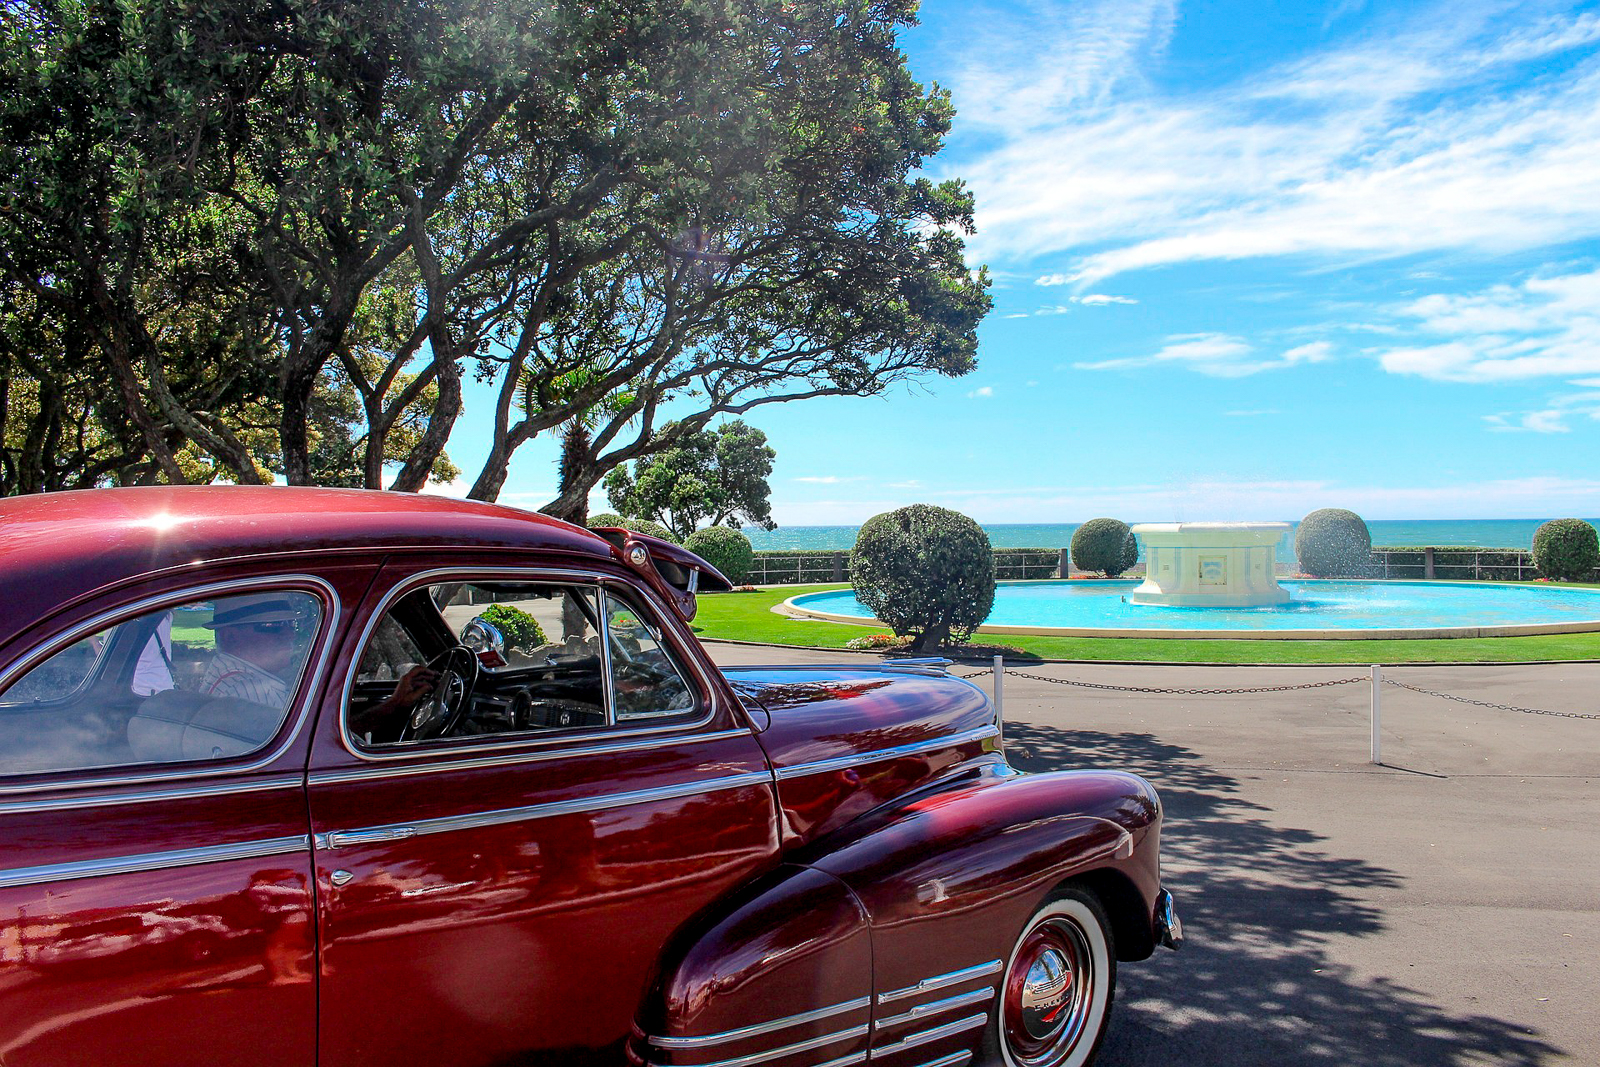 A retro car parked by an Art Deco fountain overlooking the ocean in Napier, New Zealand